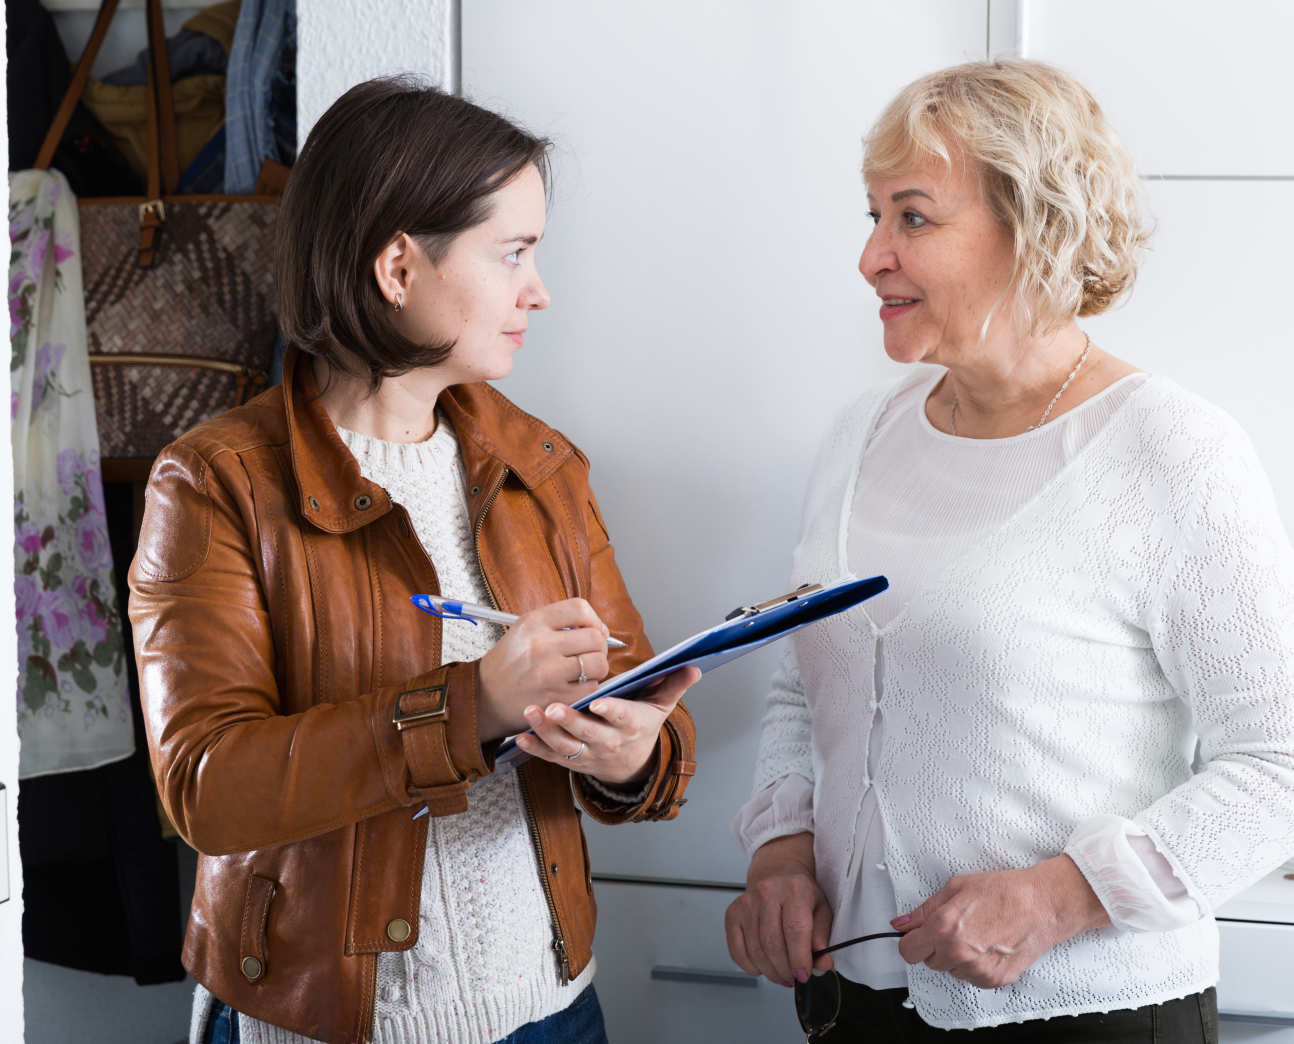 A woman with a clipboard interviewing another woman